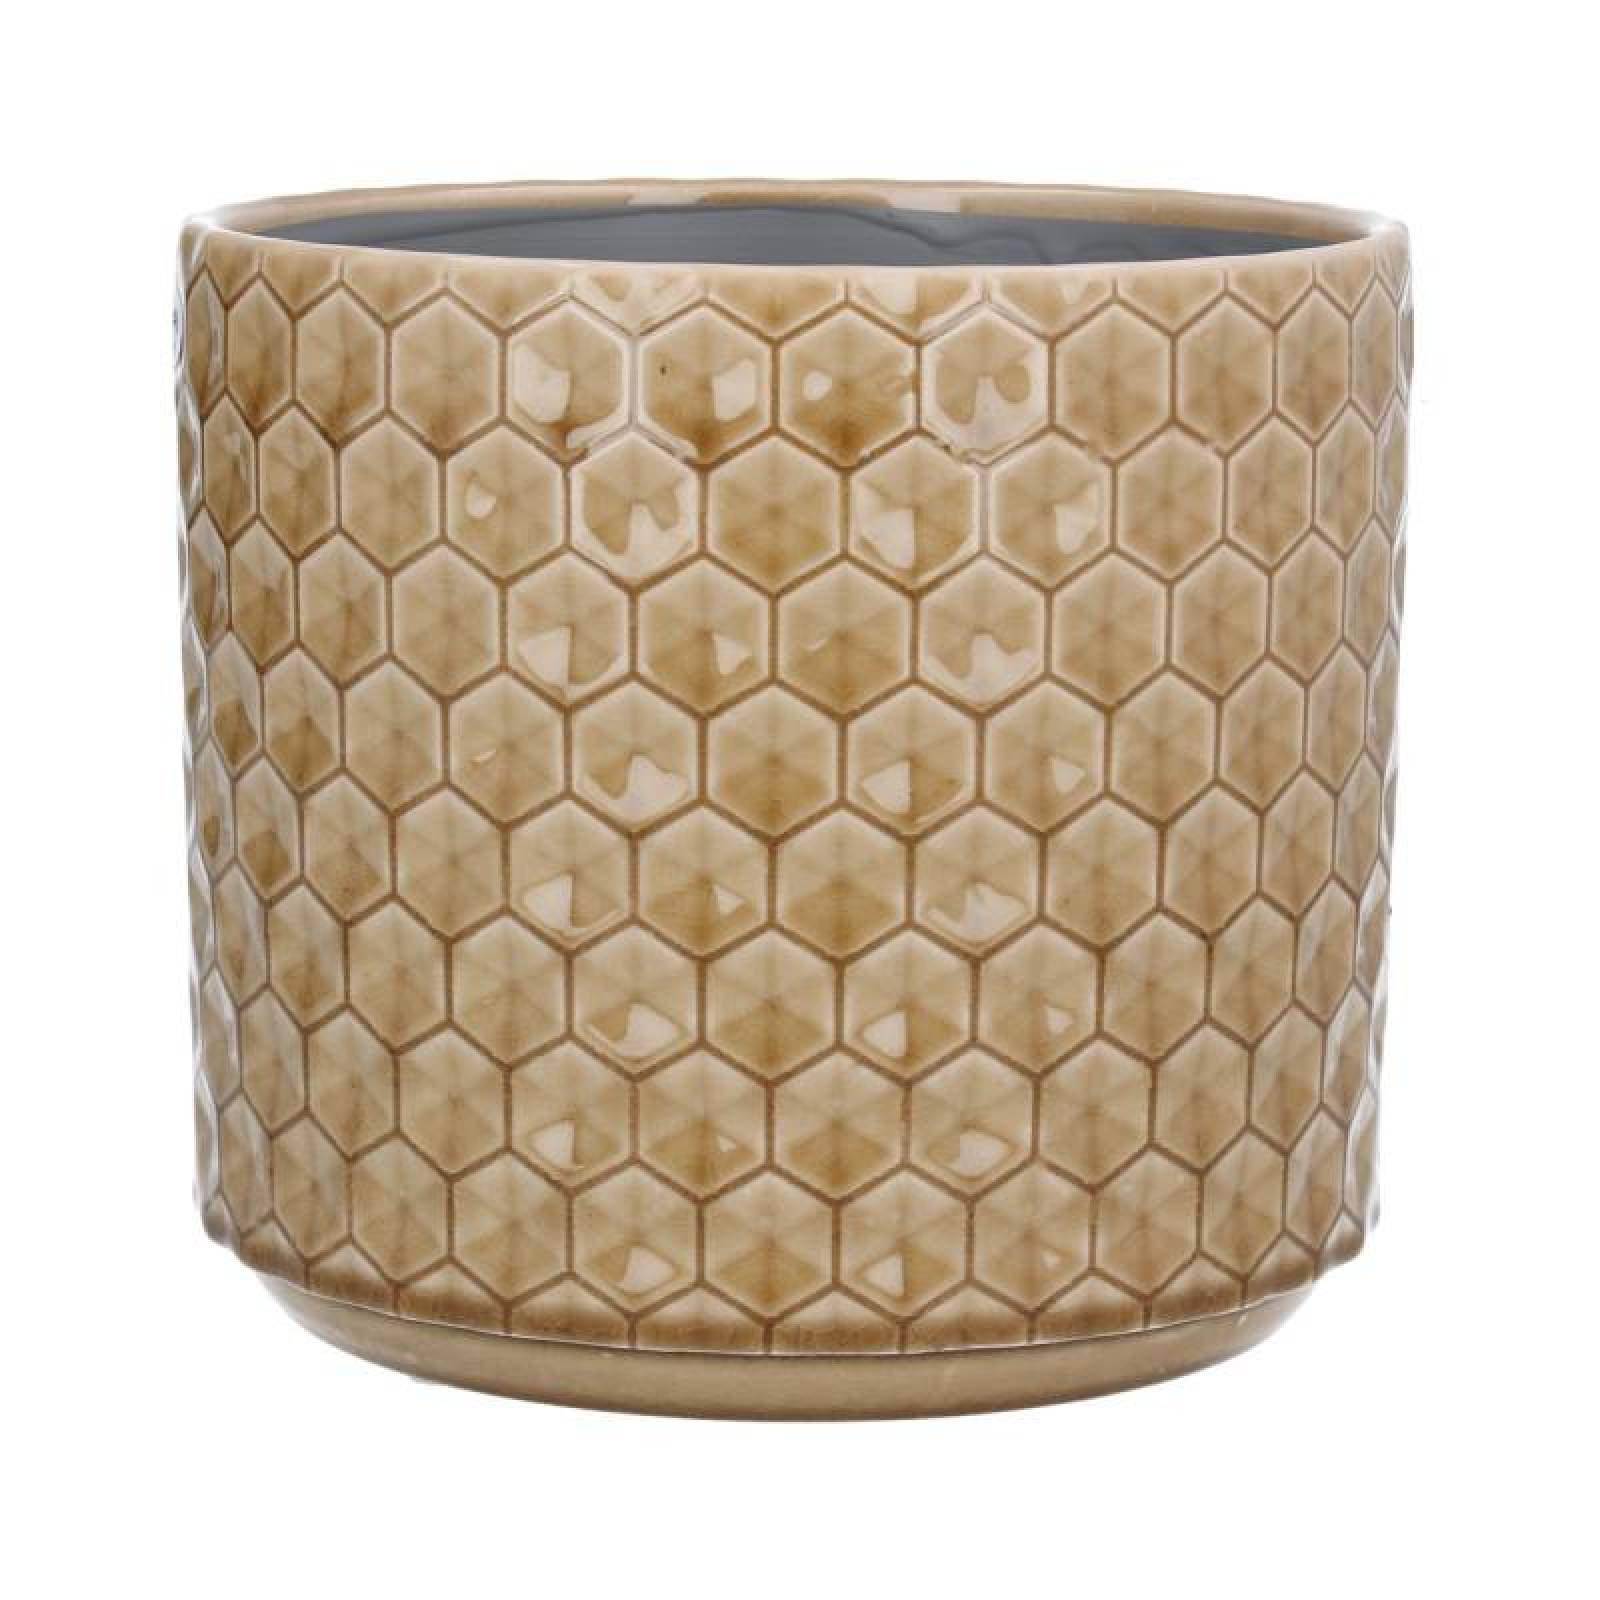 Large Honeycomb Ceramic Flowerpot Cover In Sand thumbnails